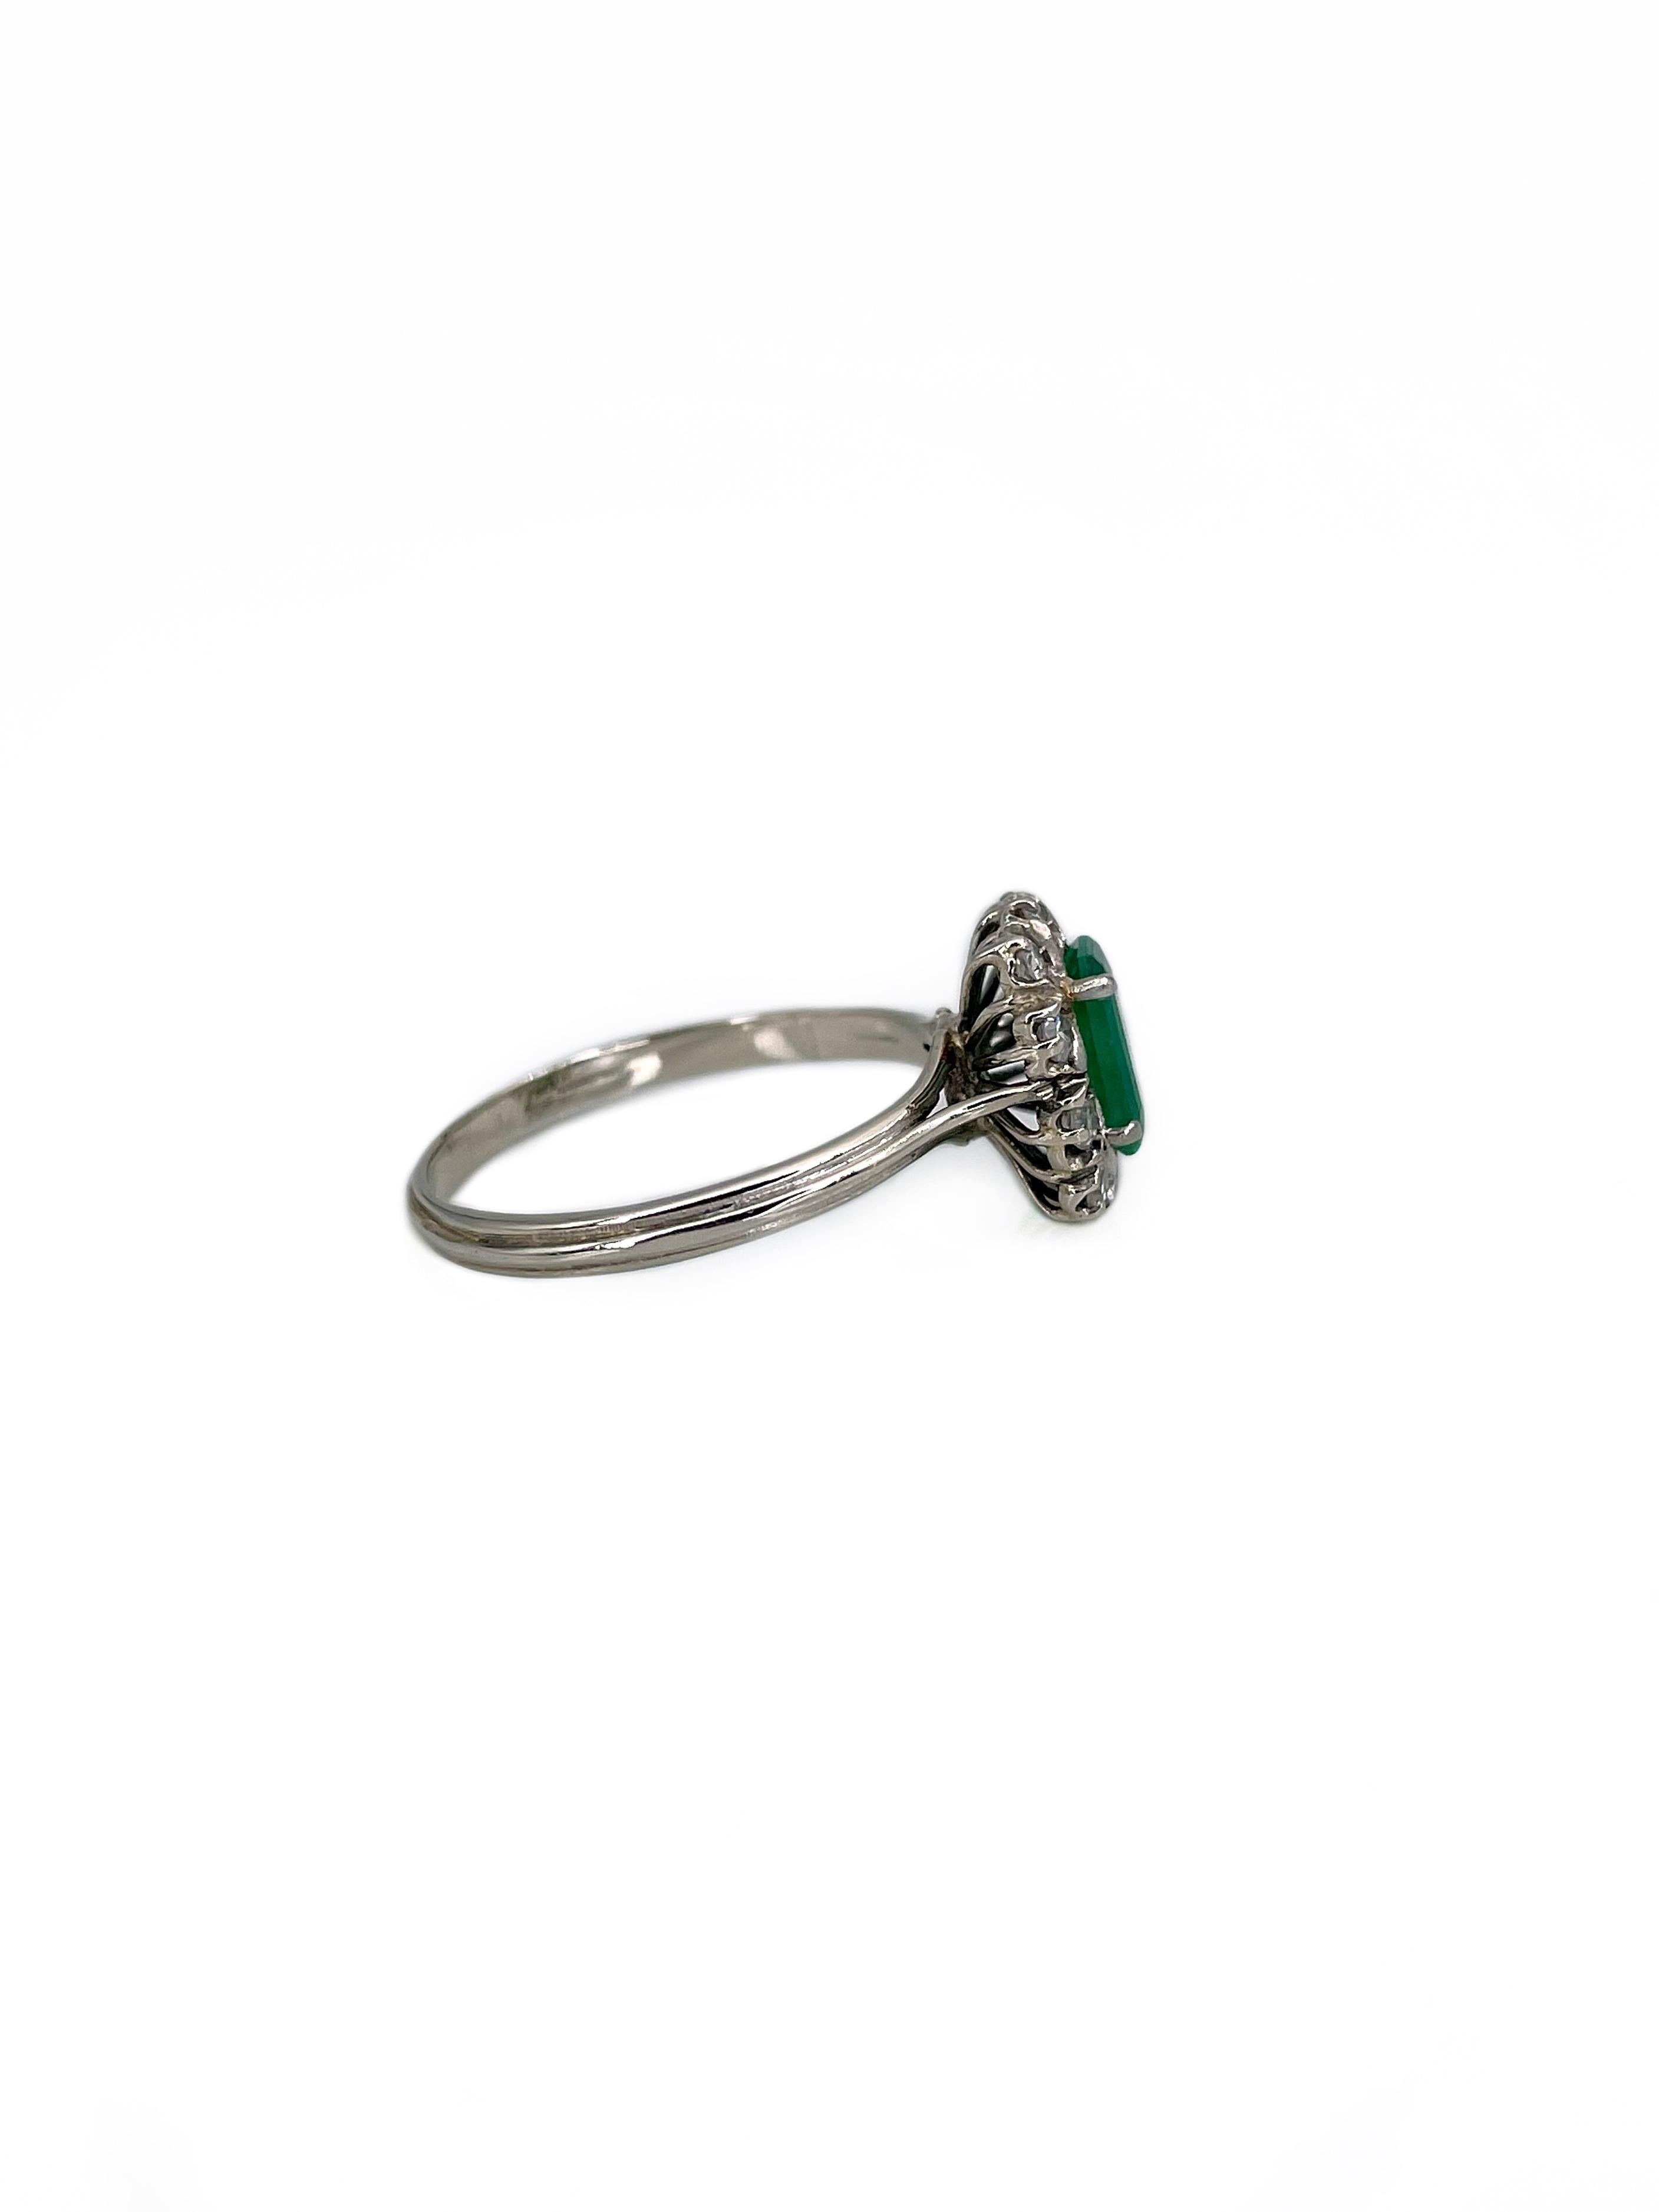 This is a lovely vintage rectangle cluster ring crafted in 18K white gold. Circa 1950. 
The piece features: 
- 1 rectangle emerald: 0.65ct, vslbG 6/4, P2
- 10 round (17 facet) diamonds: TW 0.20ct, RW+/W, VS-SI

Weight: 3.01g
Size: 18 (US